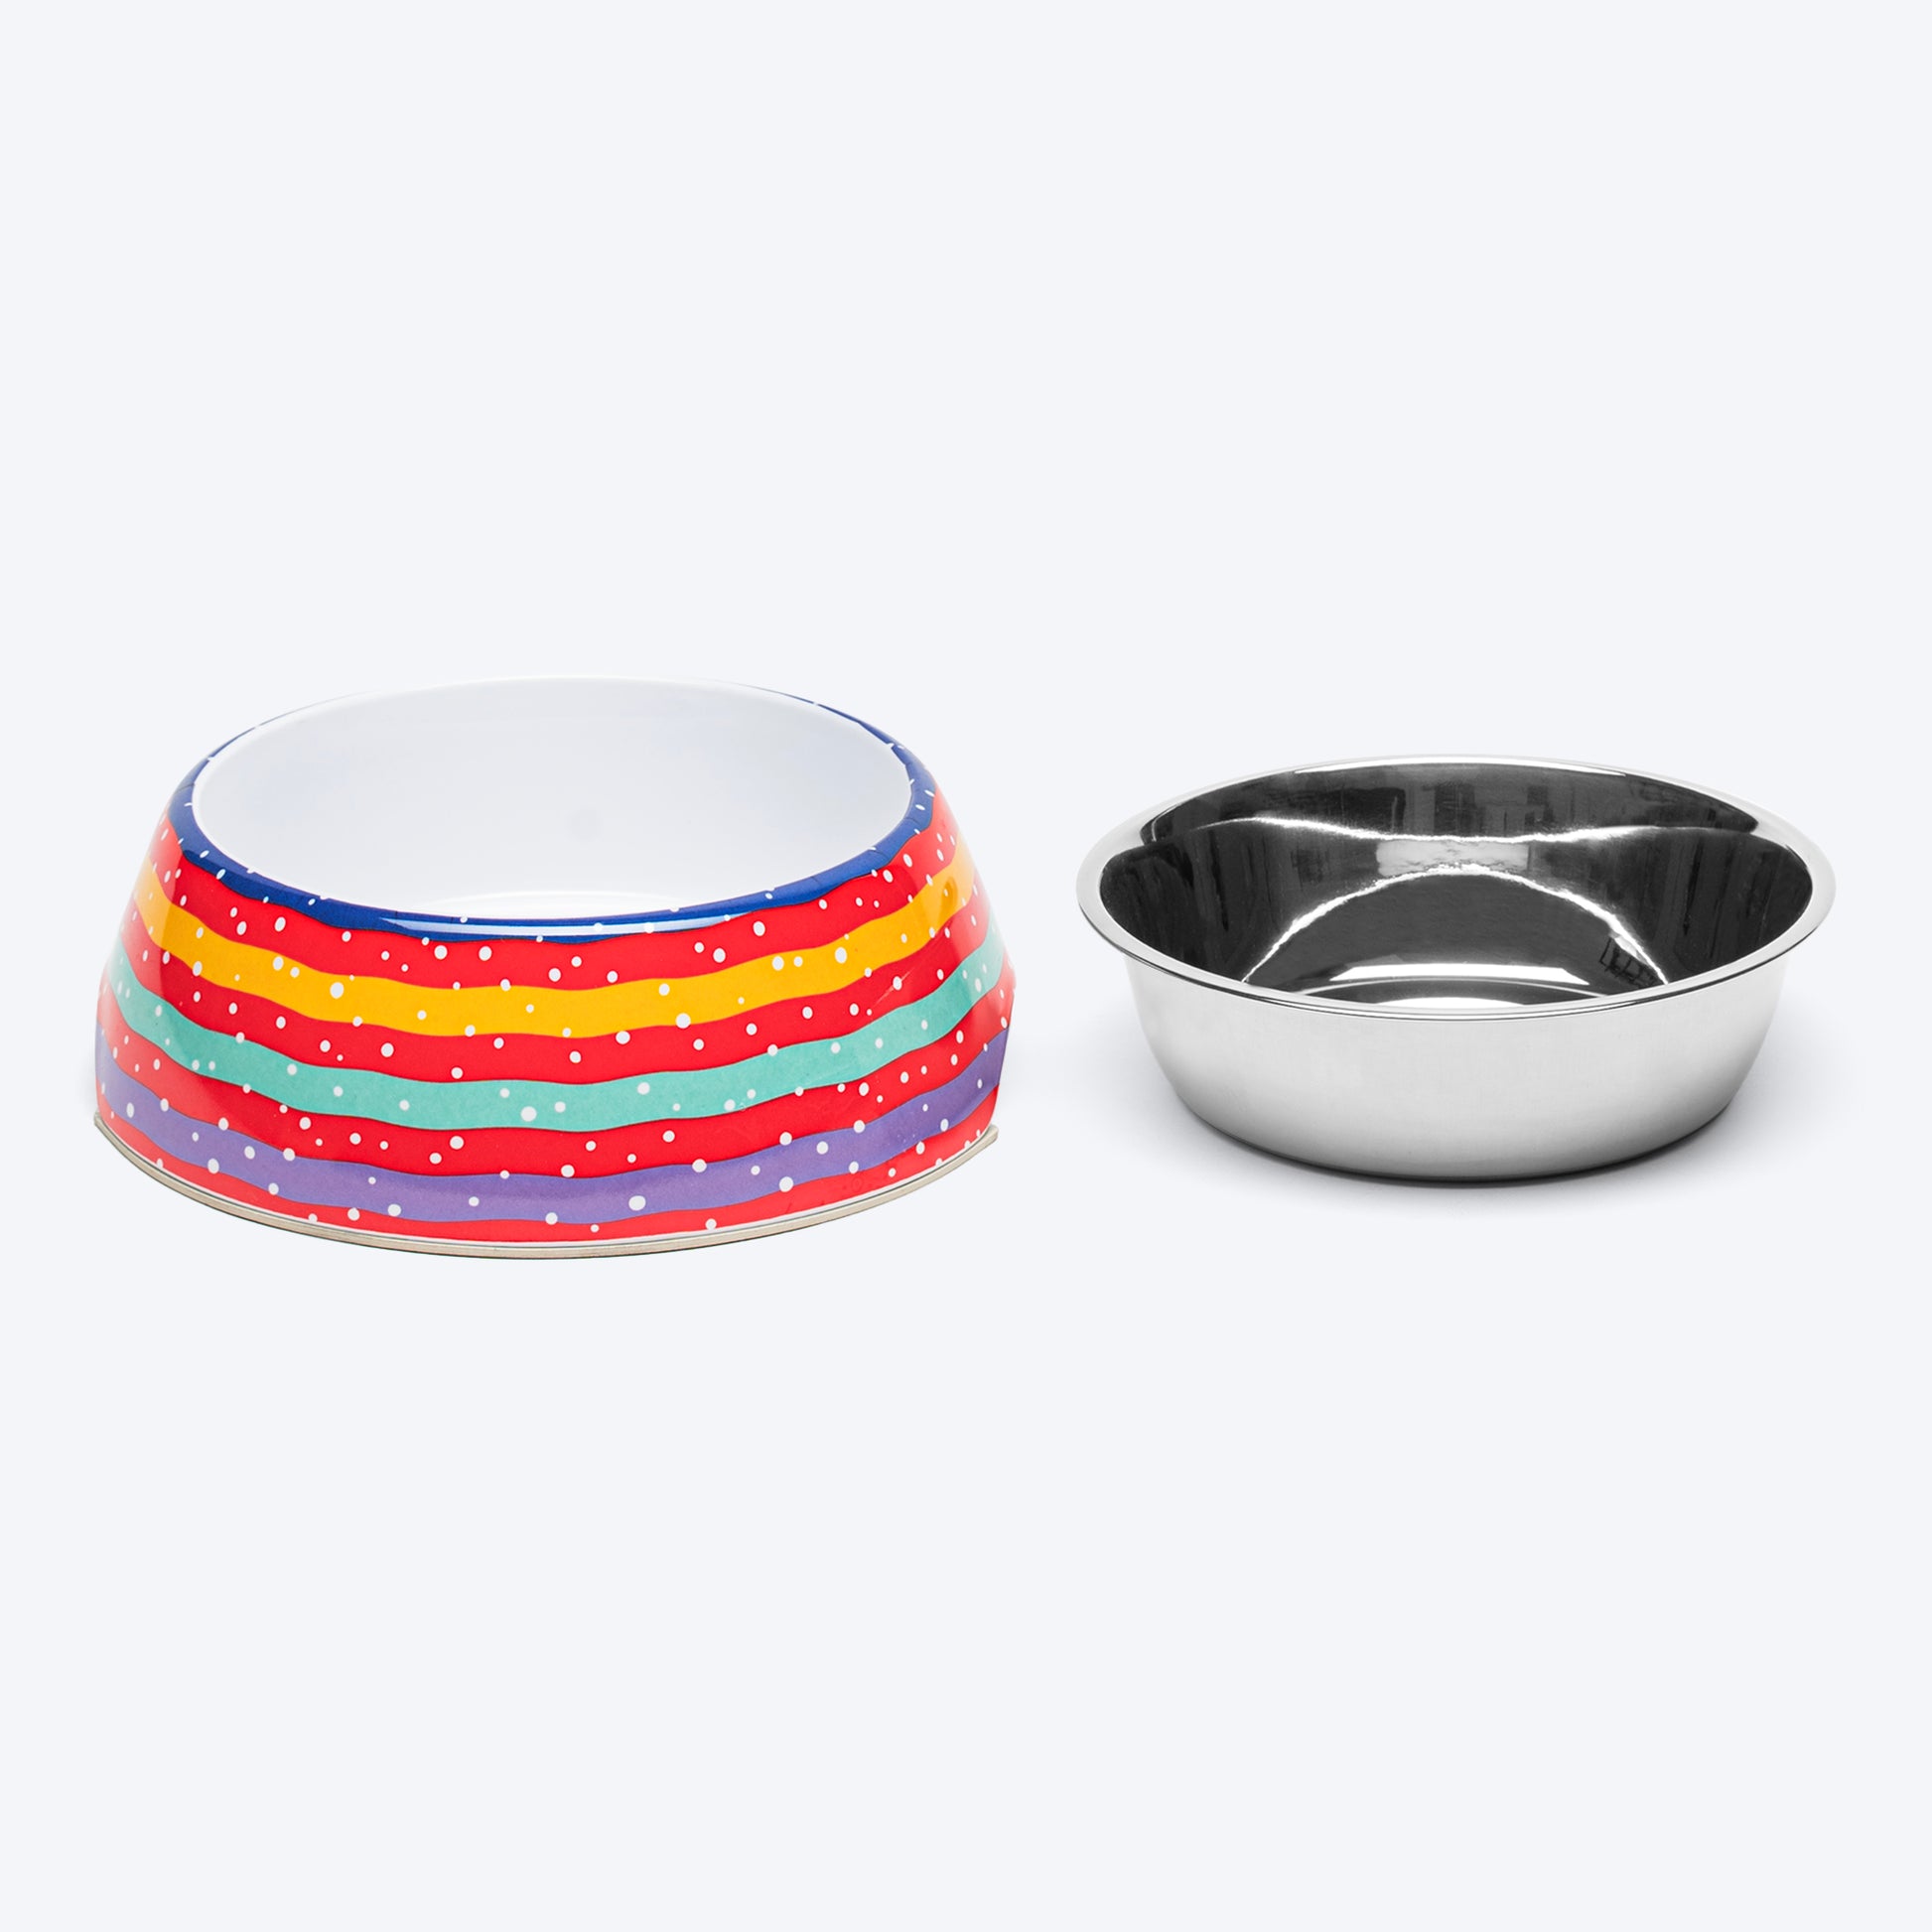 HUFT Colour Fun Printed Melamine Bowl for Dogs - Multicolour - Heads Up For Tails